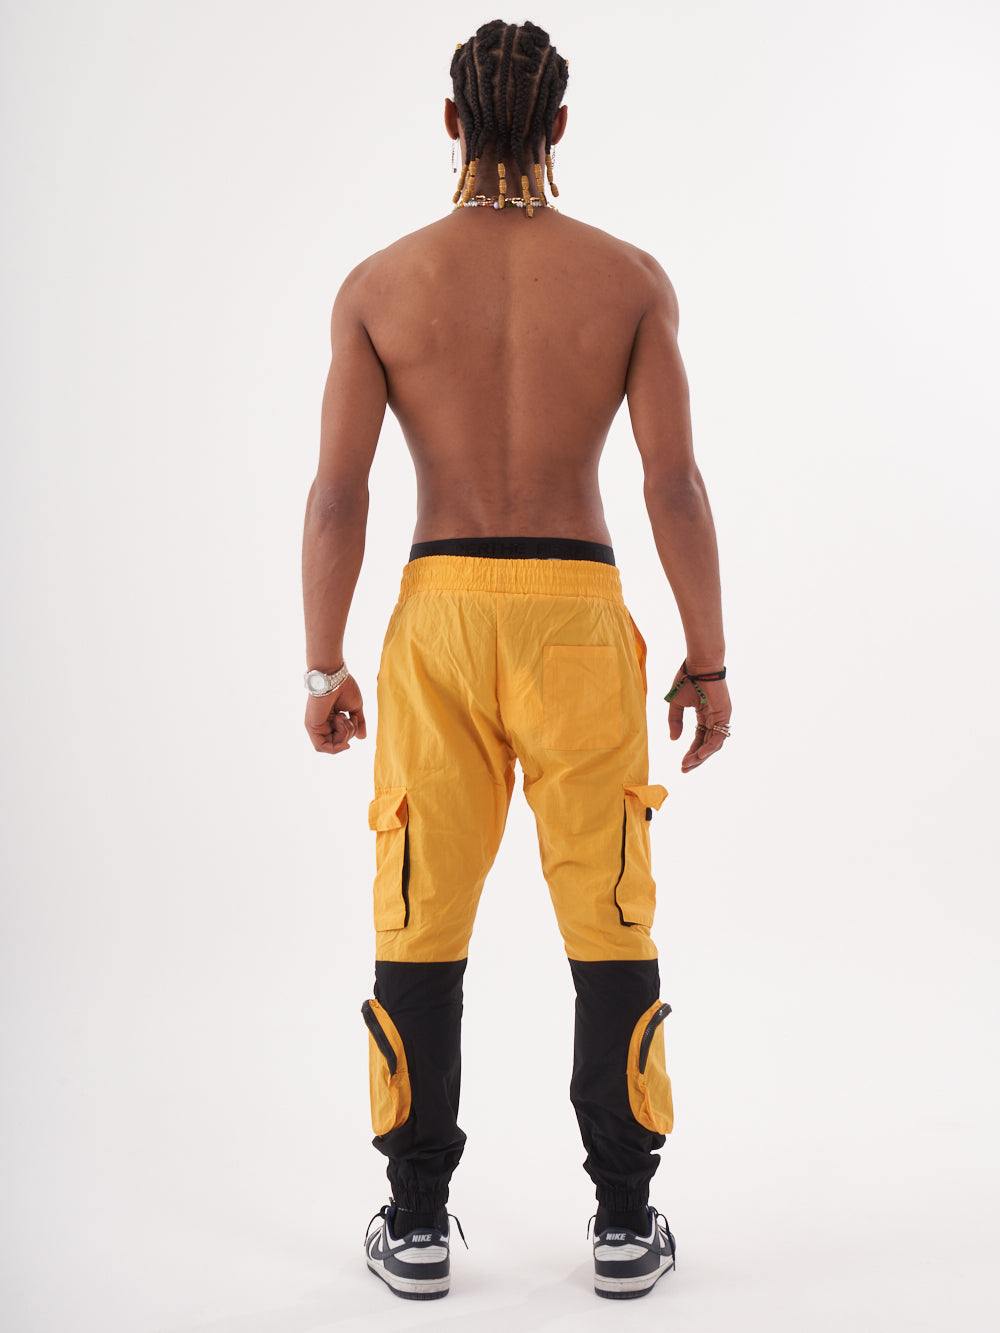 The back view of a man wearing RENEGADE | YELLOW cargo pants.